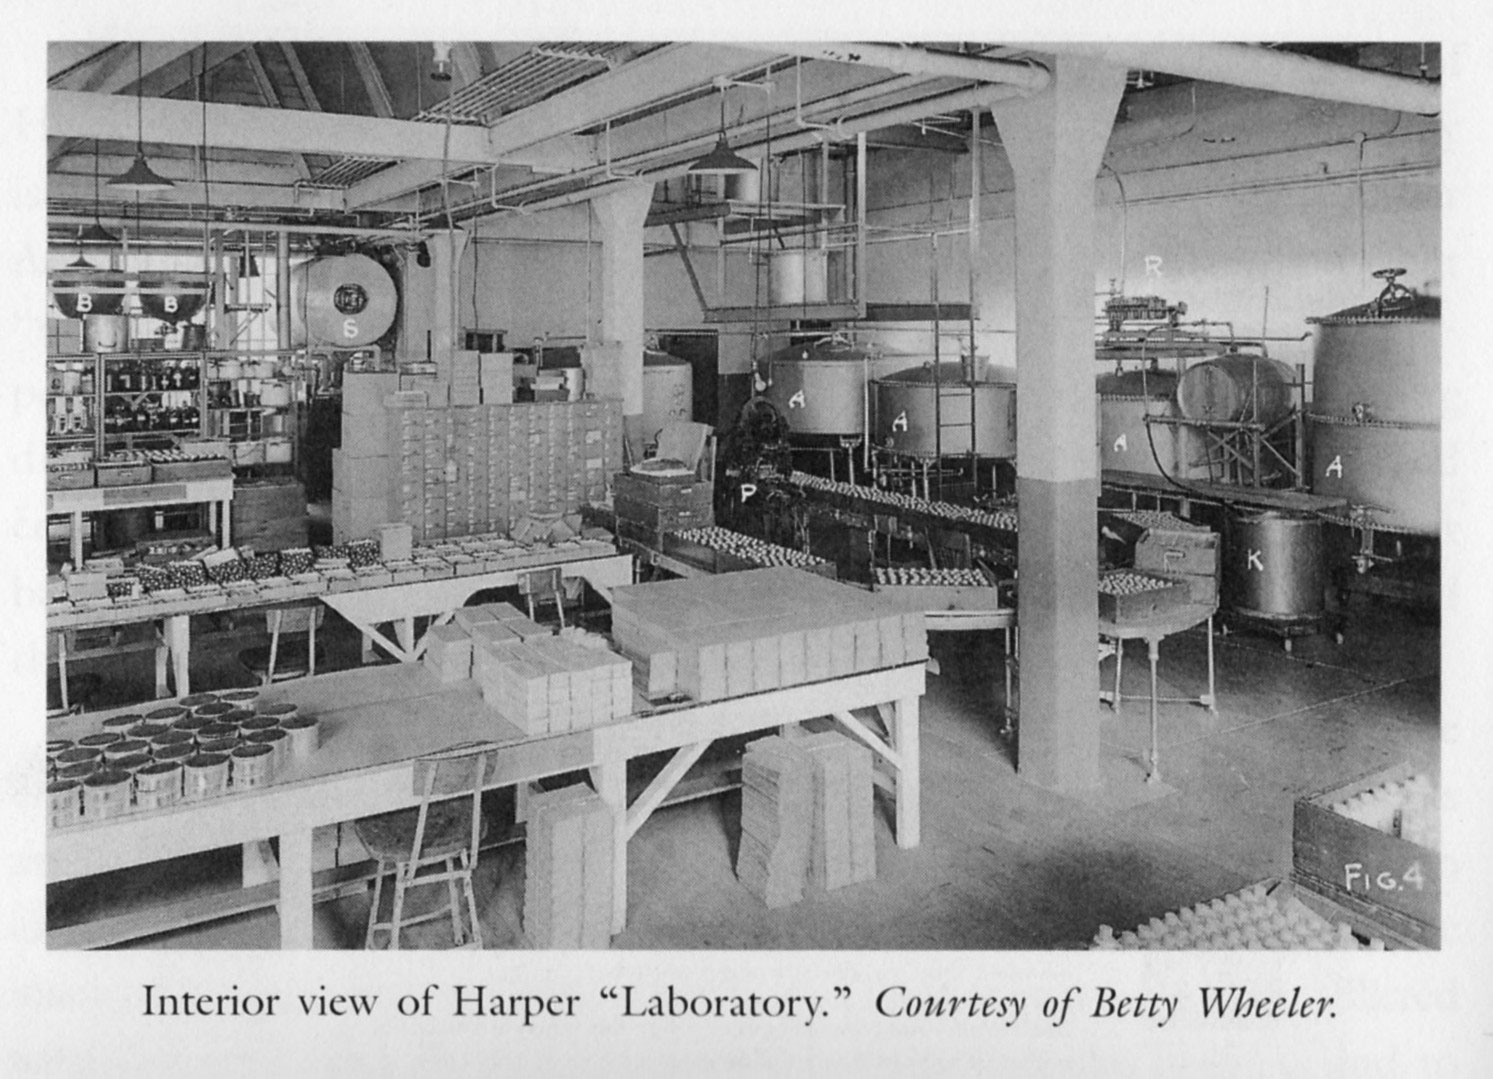 An old photo showing Harper's laboratory that is now filled with tires. [IMAGE: From the book, 'Martha Matilda Harper and The American Dream: How One Woman Changed The Face of Modern Business' by Jane R. Plitt]